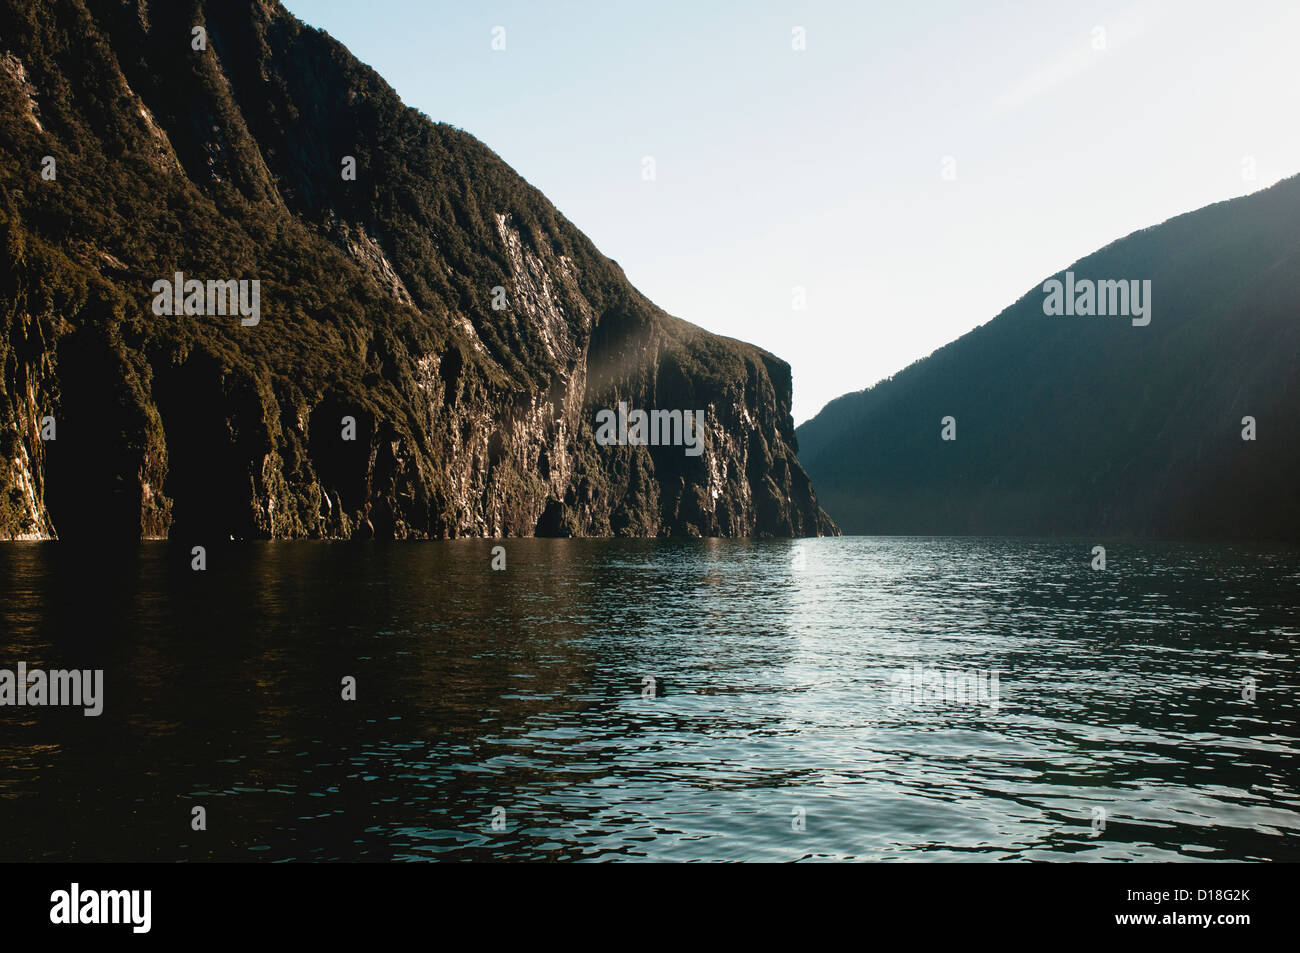 Lake and rocky mountain cliffs Stock Photo